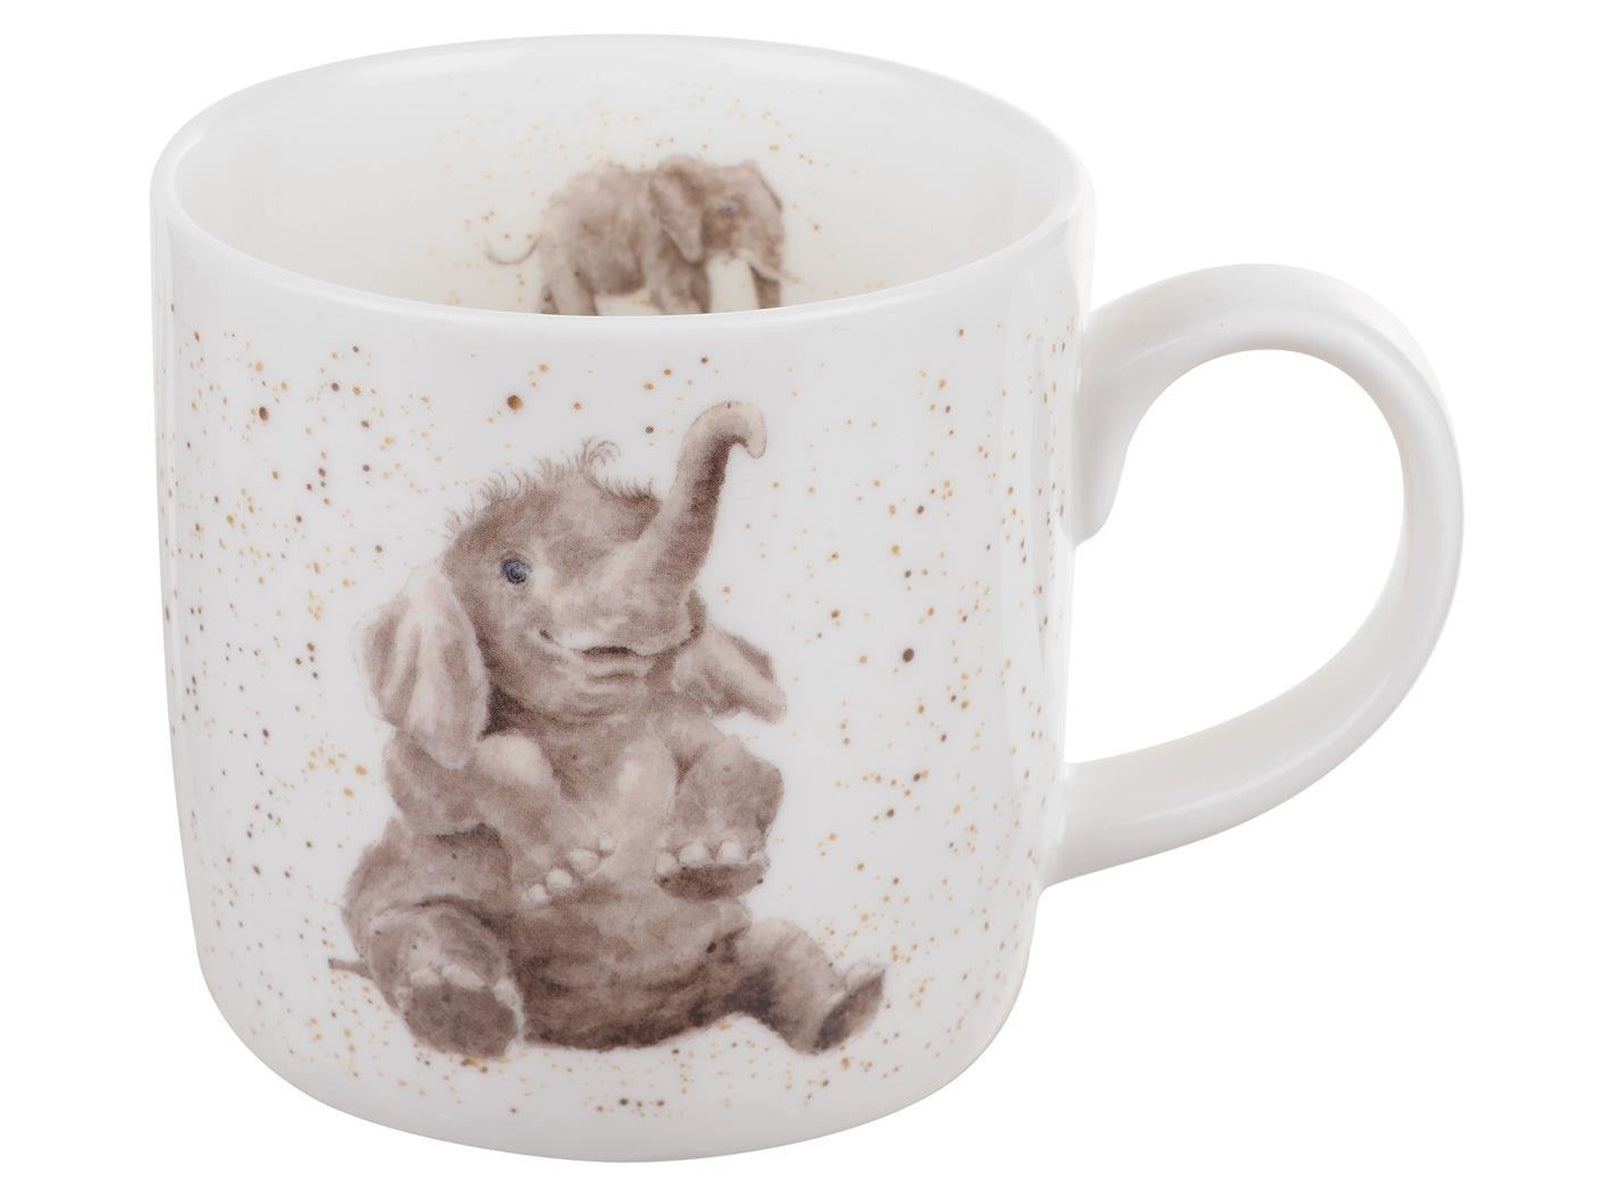 A cream porcelain mug with a watercolour baby elephant on the front